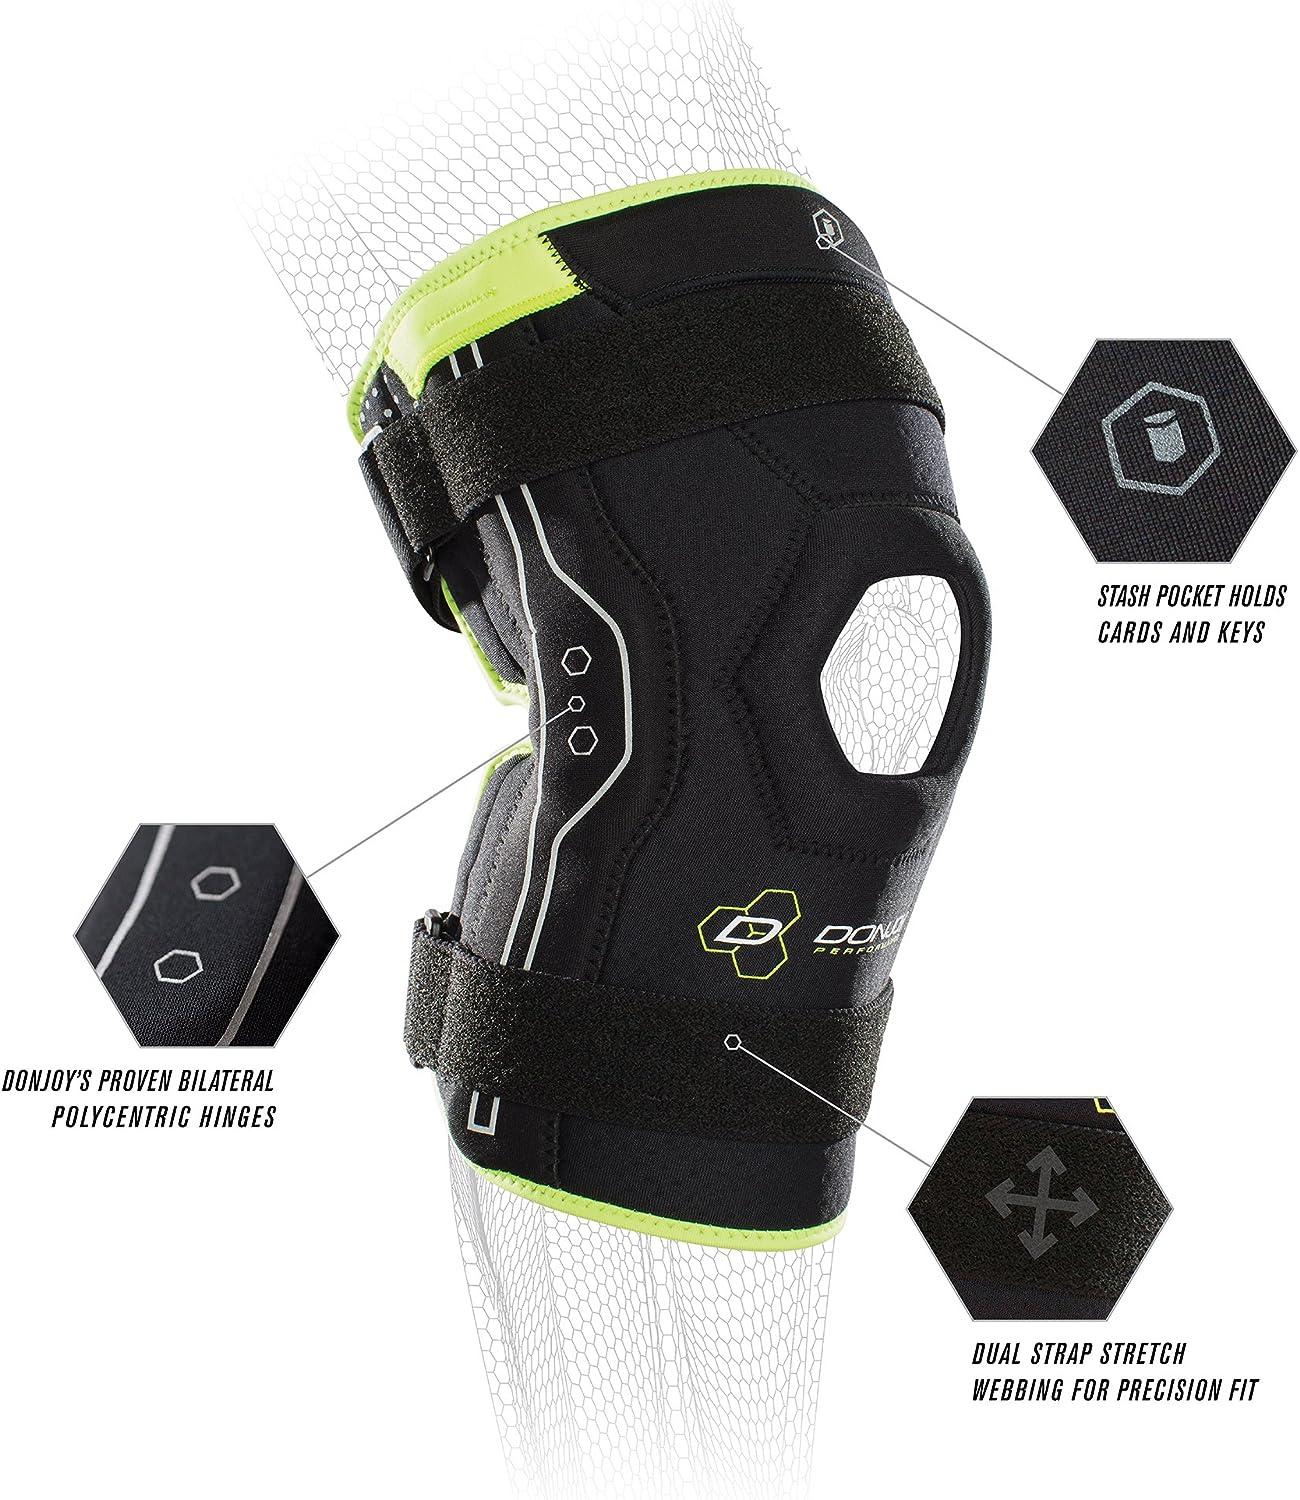 Donjoy Quick Fit Hinged Knee Brace 